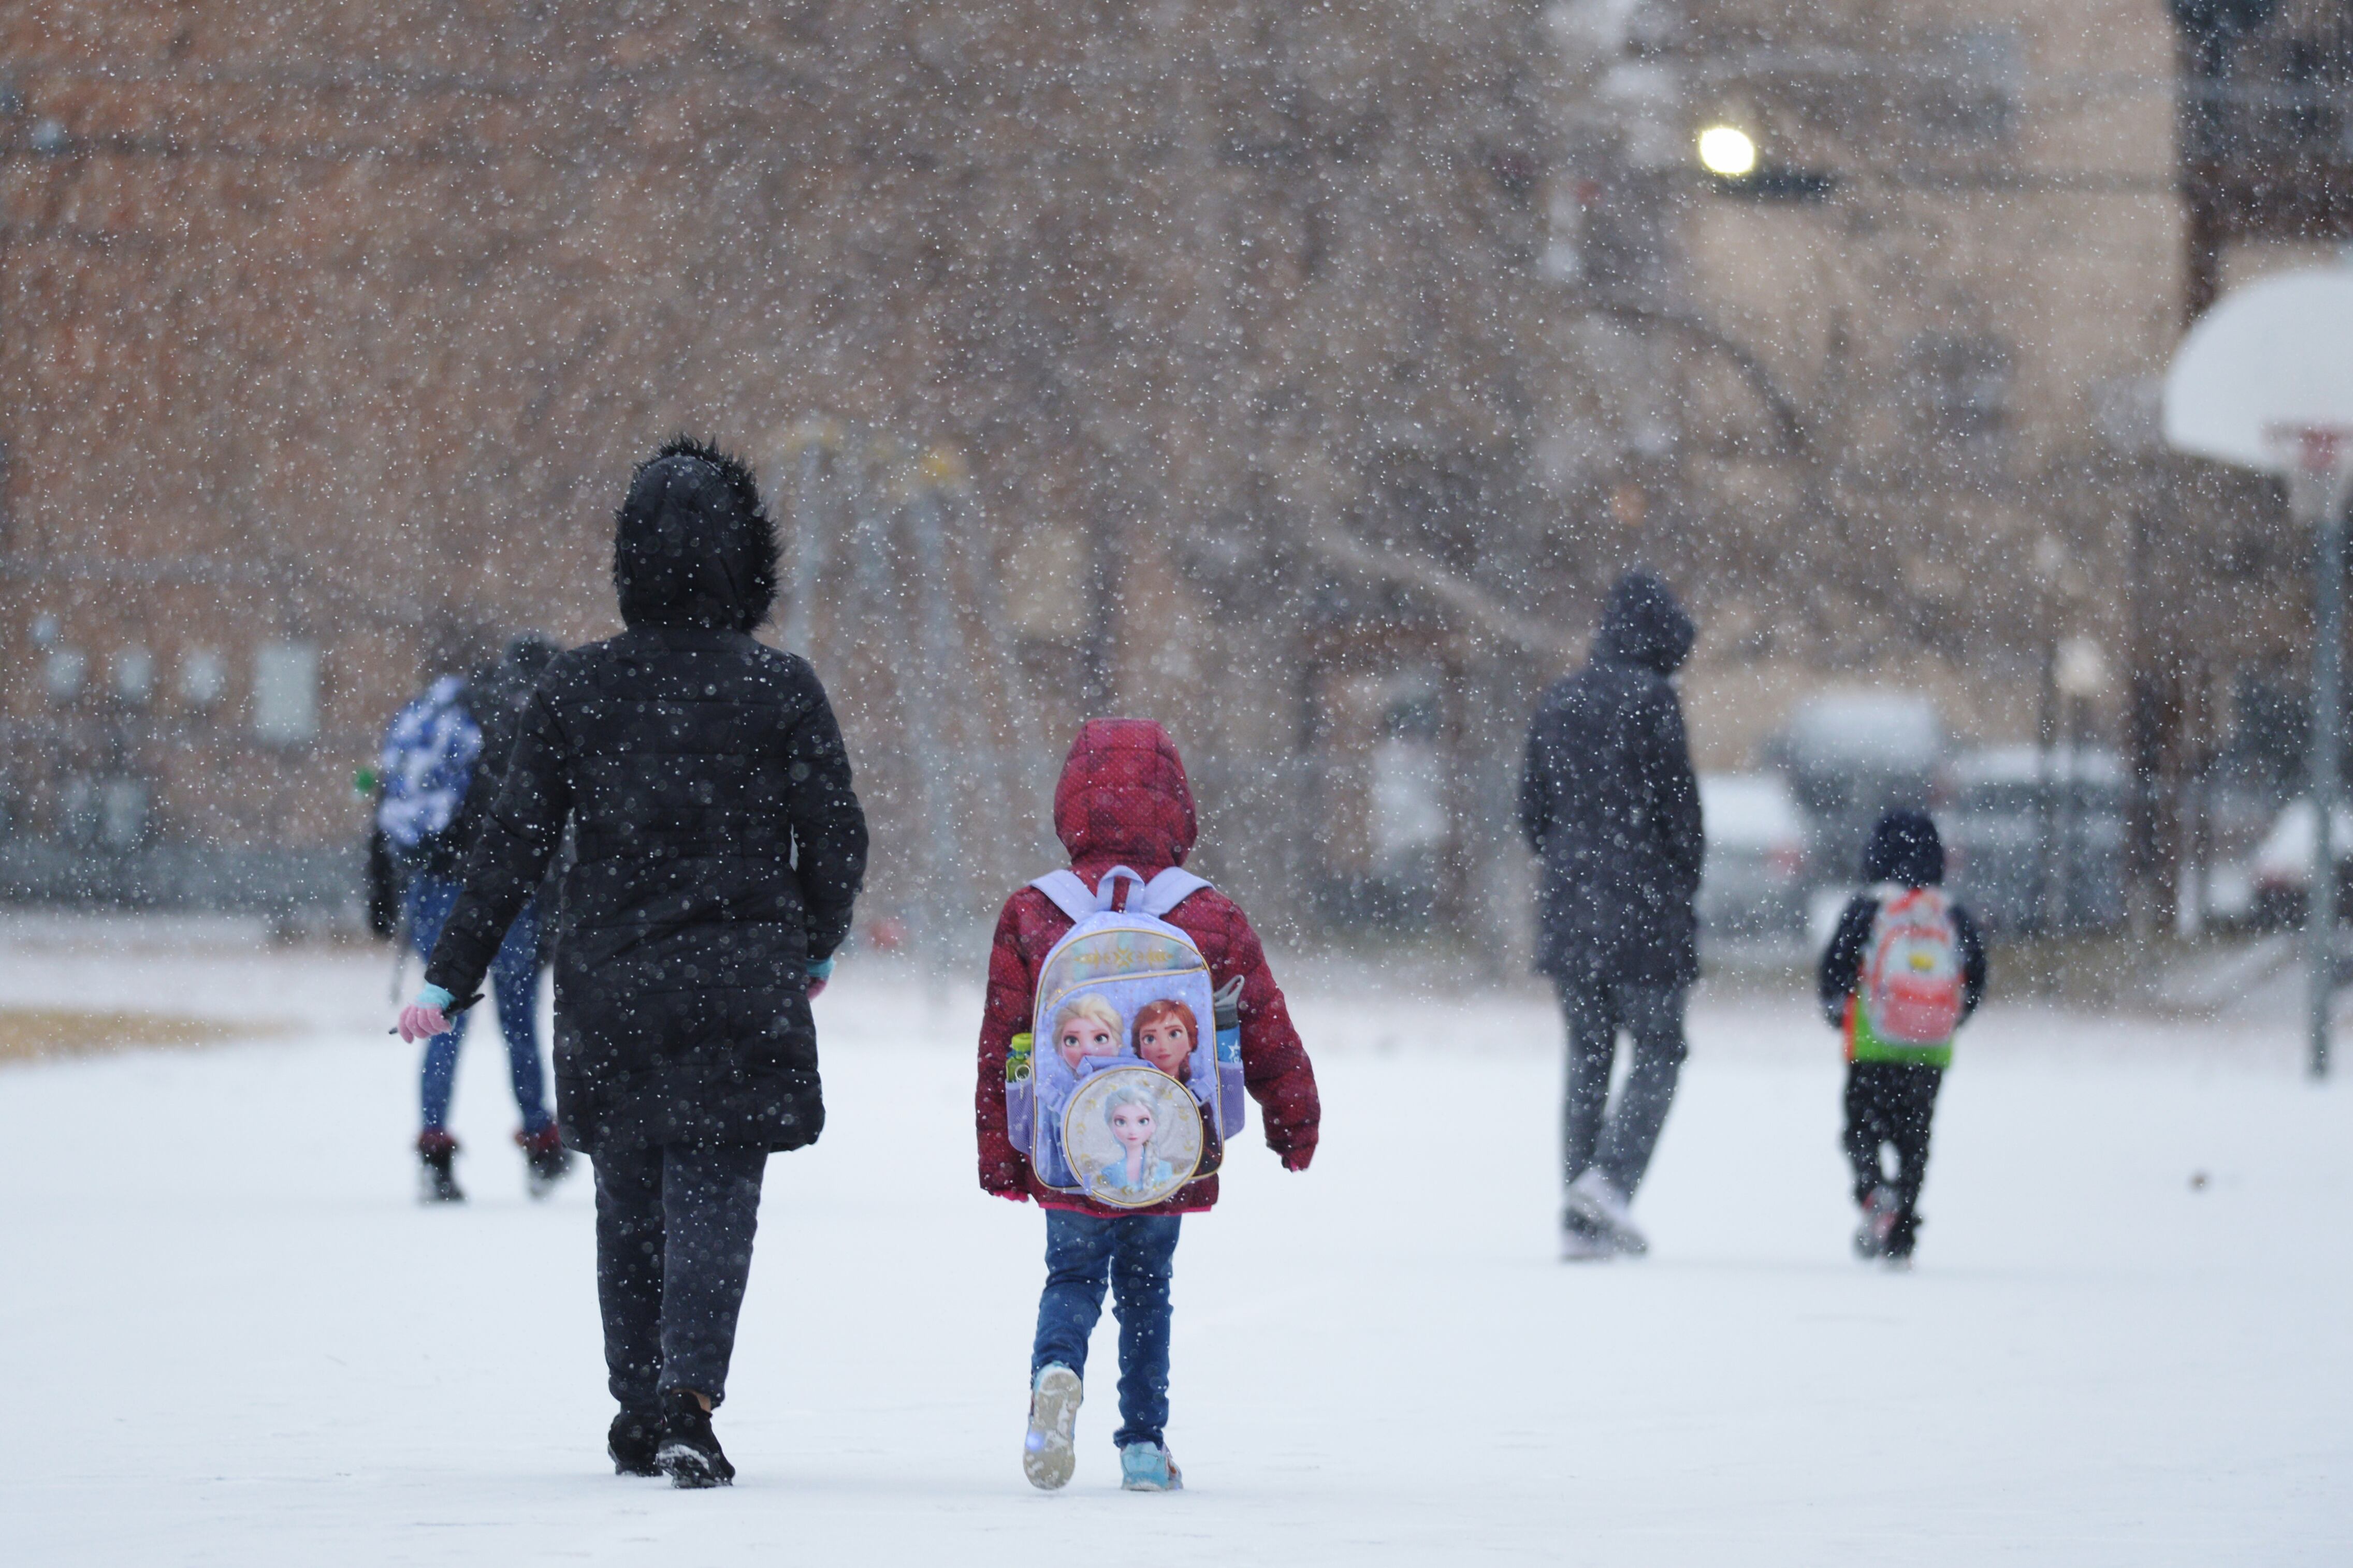 Children wearing winter coats and backpacks walk to school on a snowy day.